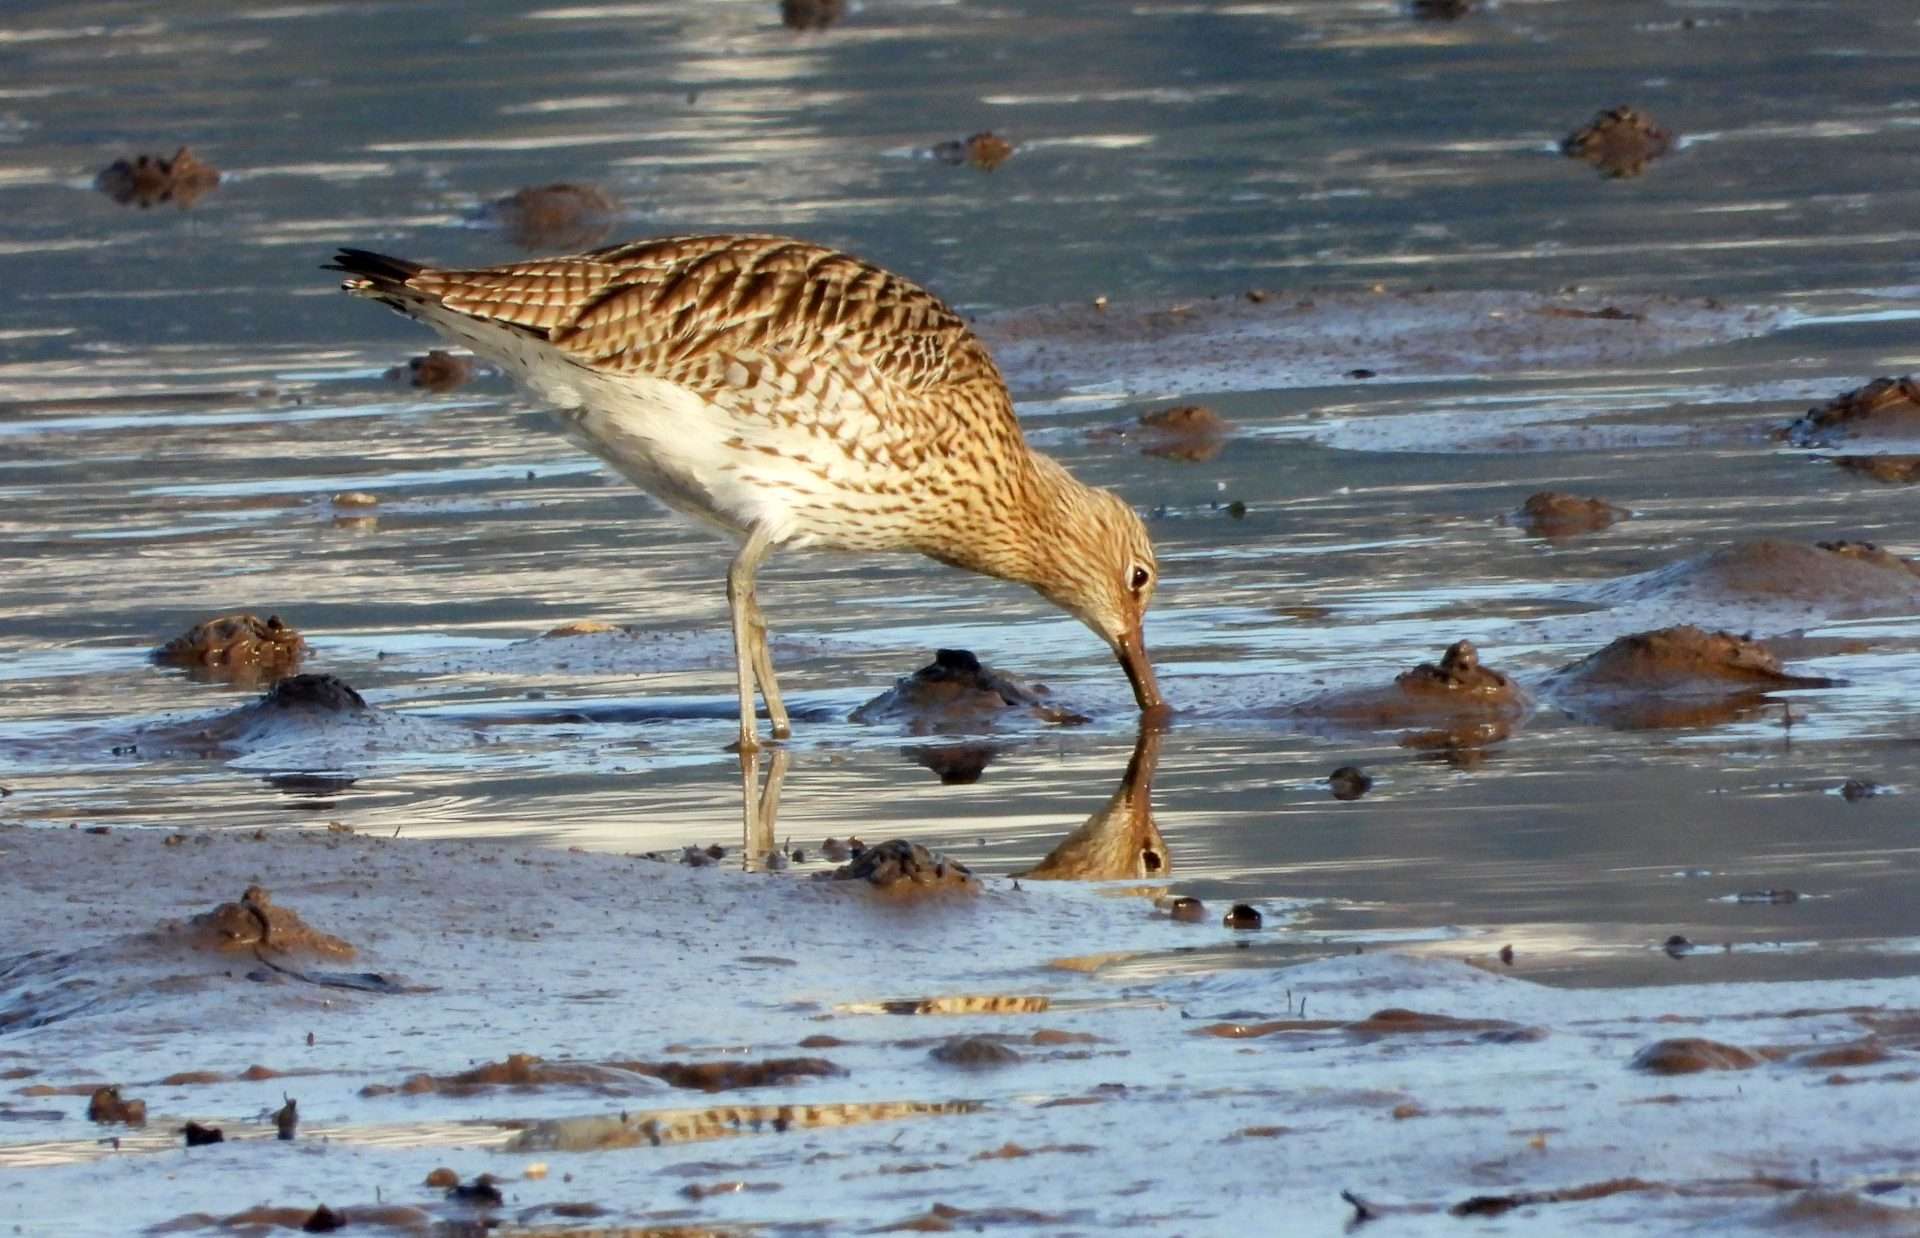 Curlew by Kenneth Bradley at Teign Estuary